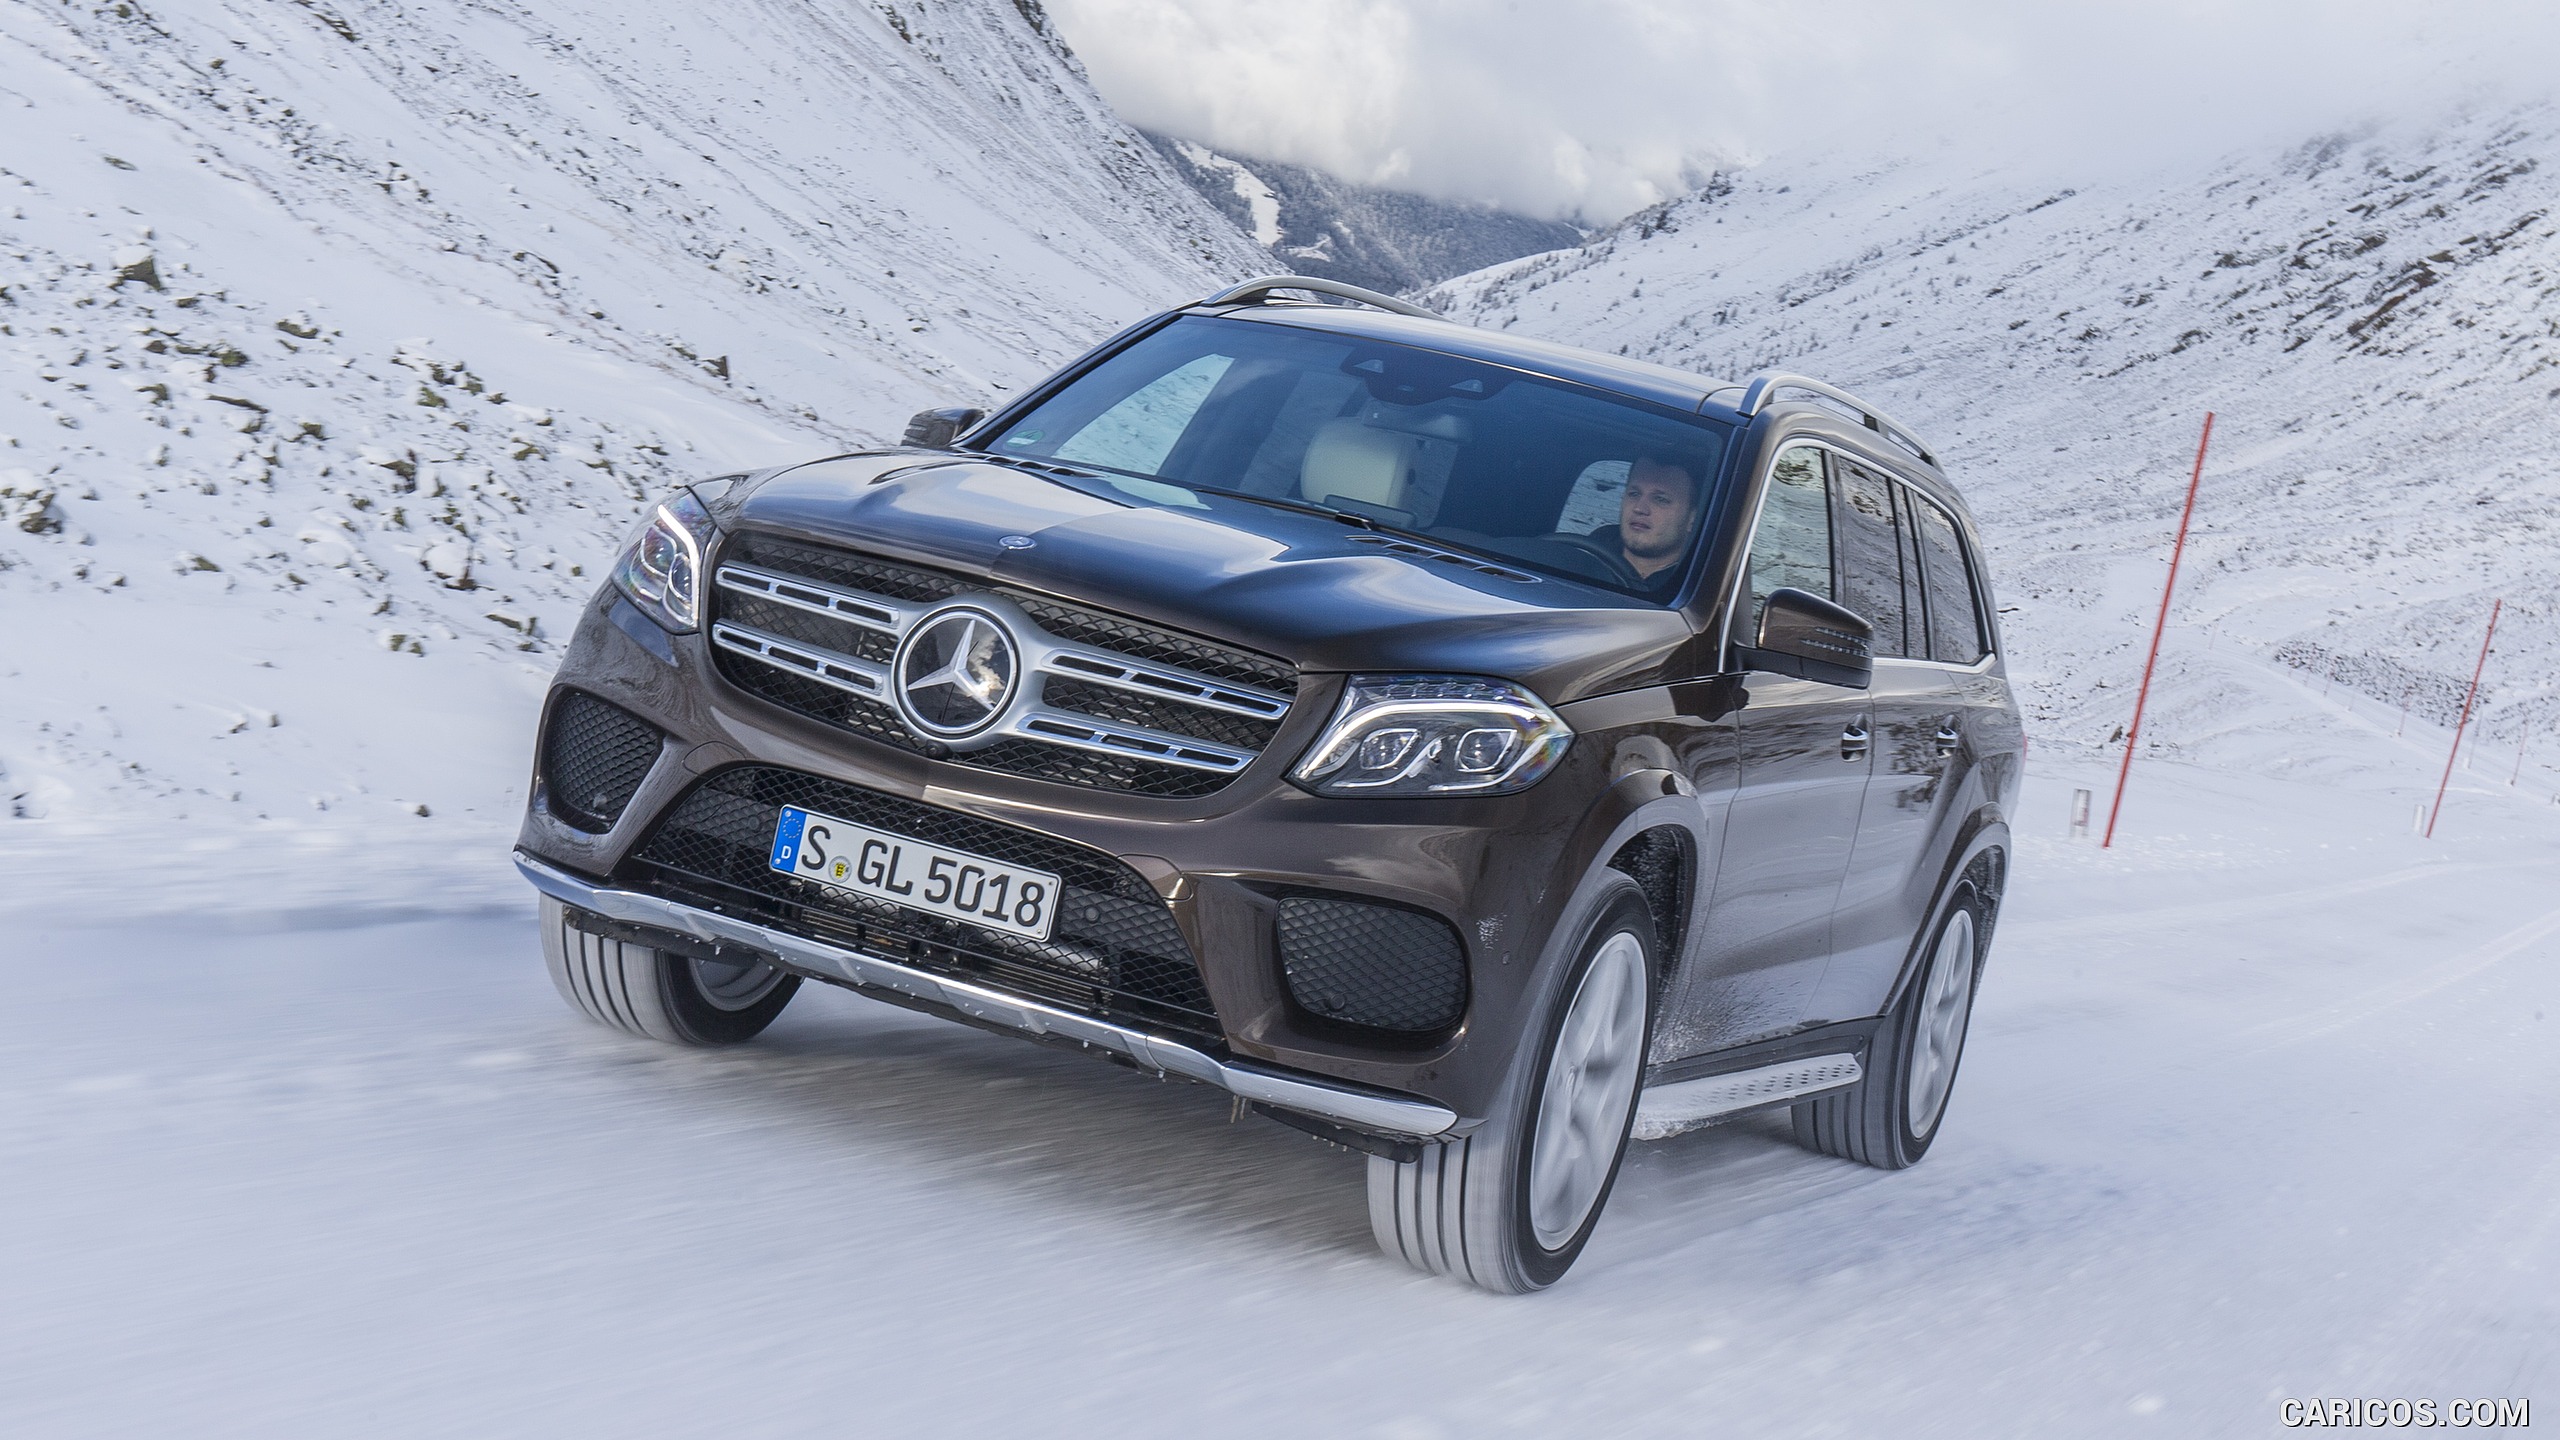 2017 Mercedes-Benz GLS 350d 4MATIC AMG Line in Snow - Front, #177 of 255